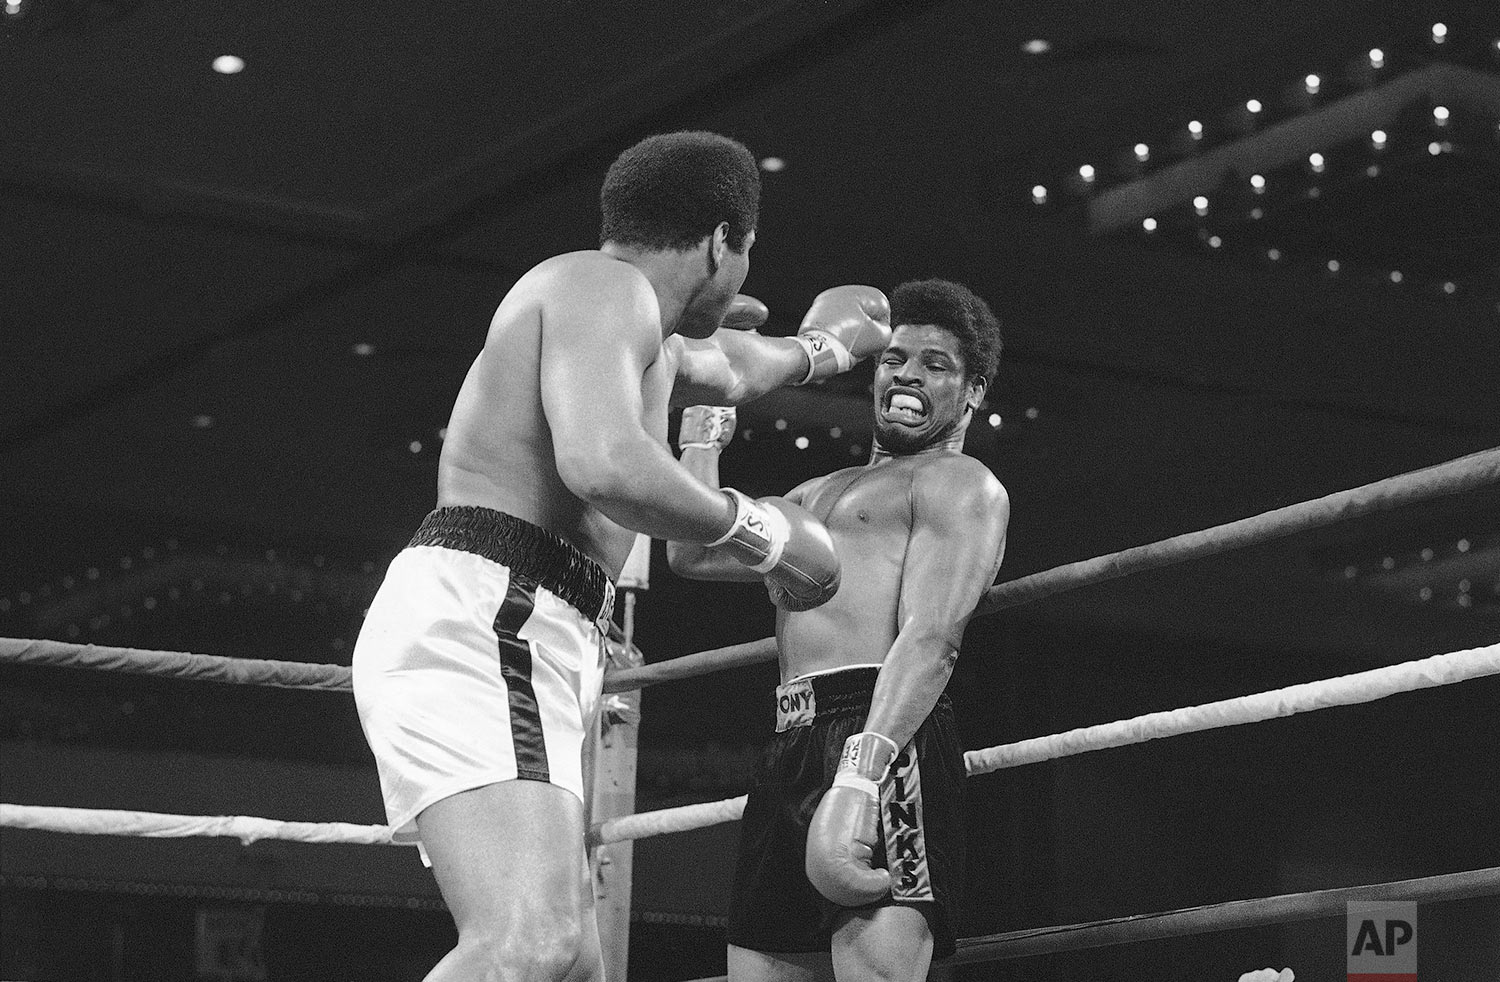  Leon Spinks, right, bobs back on Wednesday, Feb. 15, 1978 evading left jab by champion Muhammad Ali early in title fight in Las Vegas, Nevada. "I underestimated him, he is a tough kid", Ali said in his dressing room, after officials awarded the figh